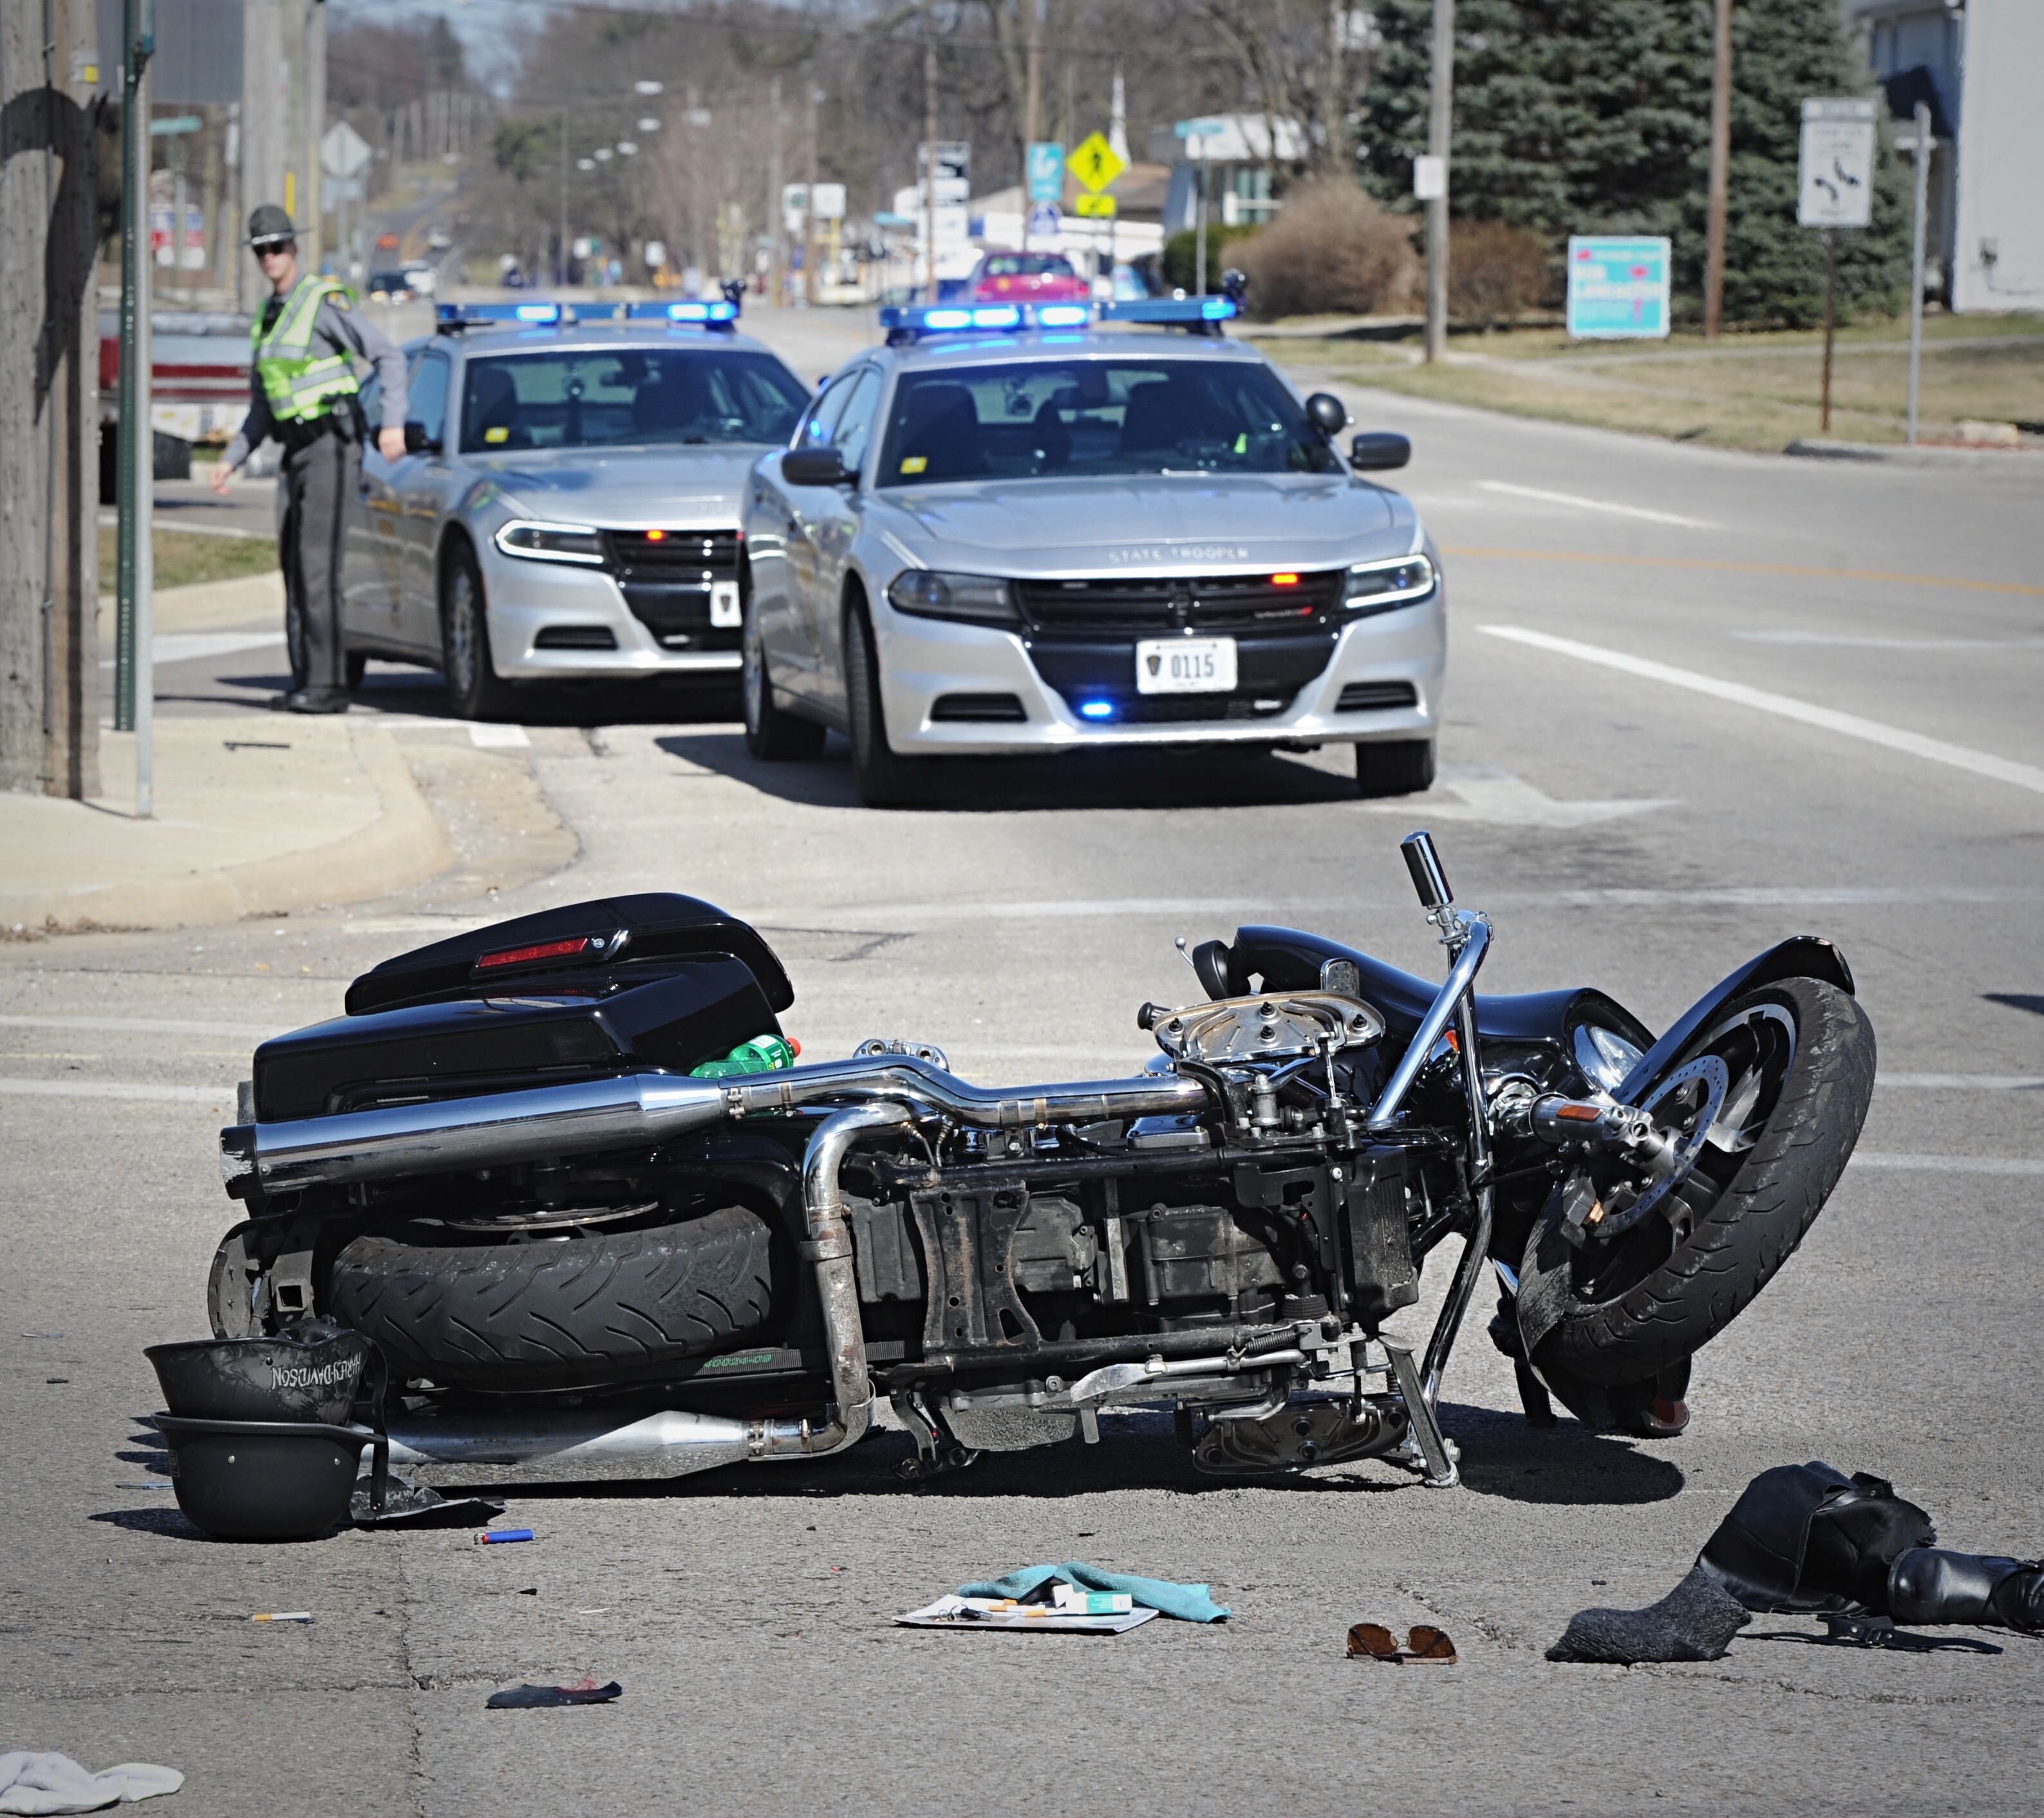 Motorcycle Accident Akron Ohio Reviewmotors.co